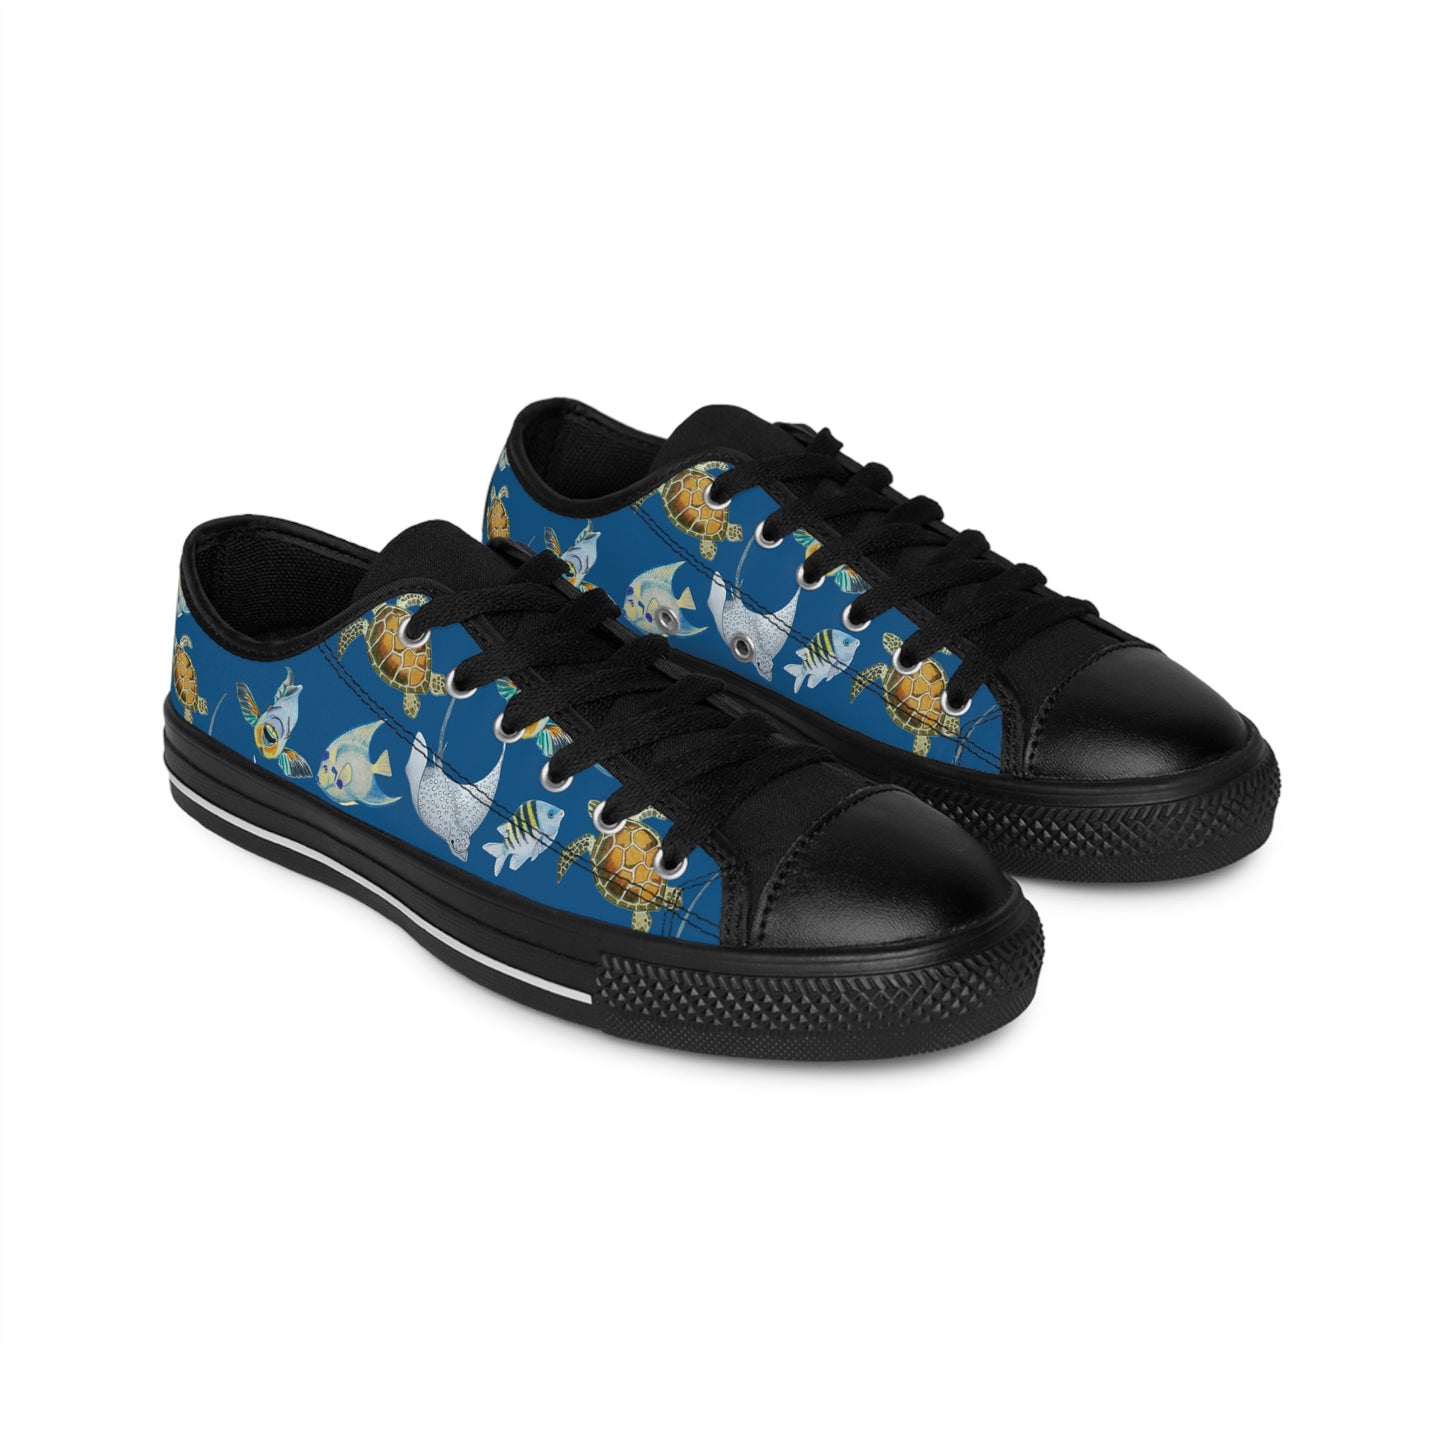 Sargasso Sea - Low Top Sneakers - Pacific Blue